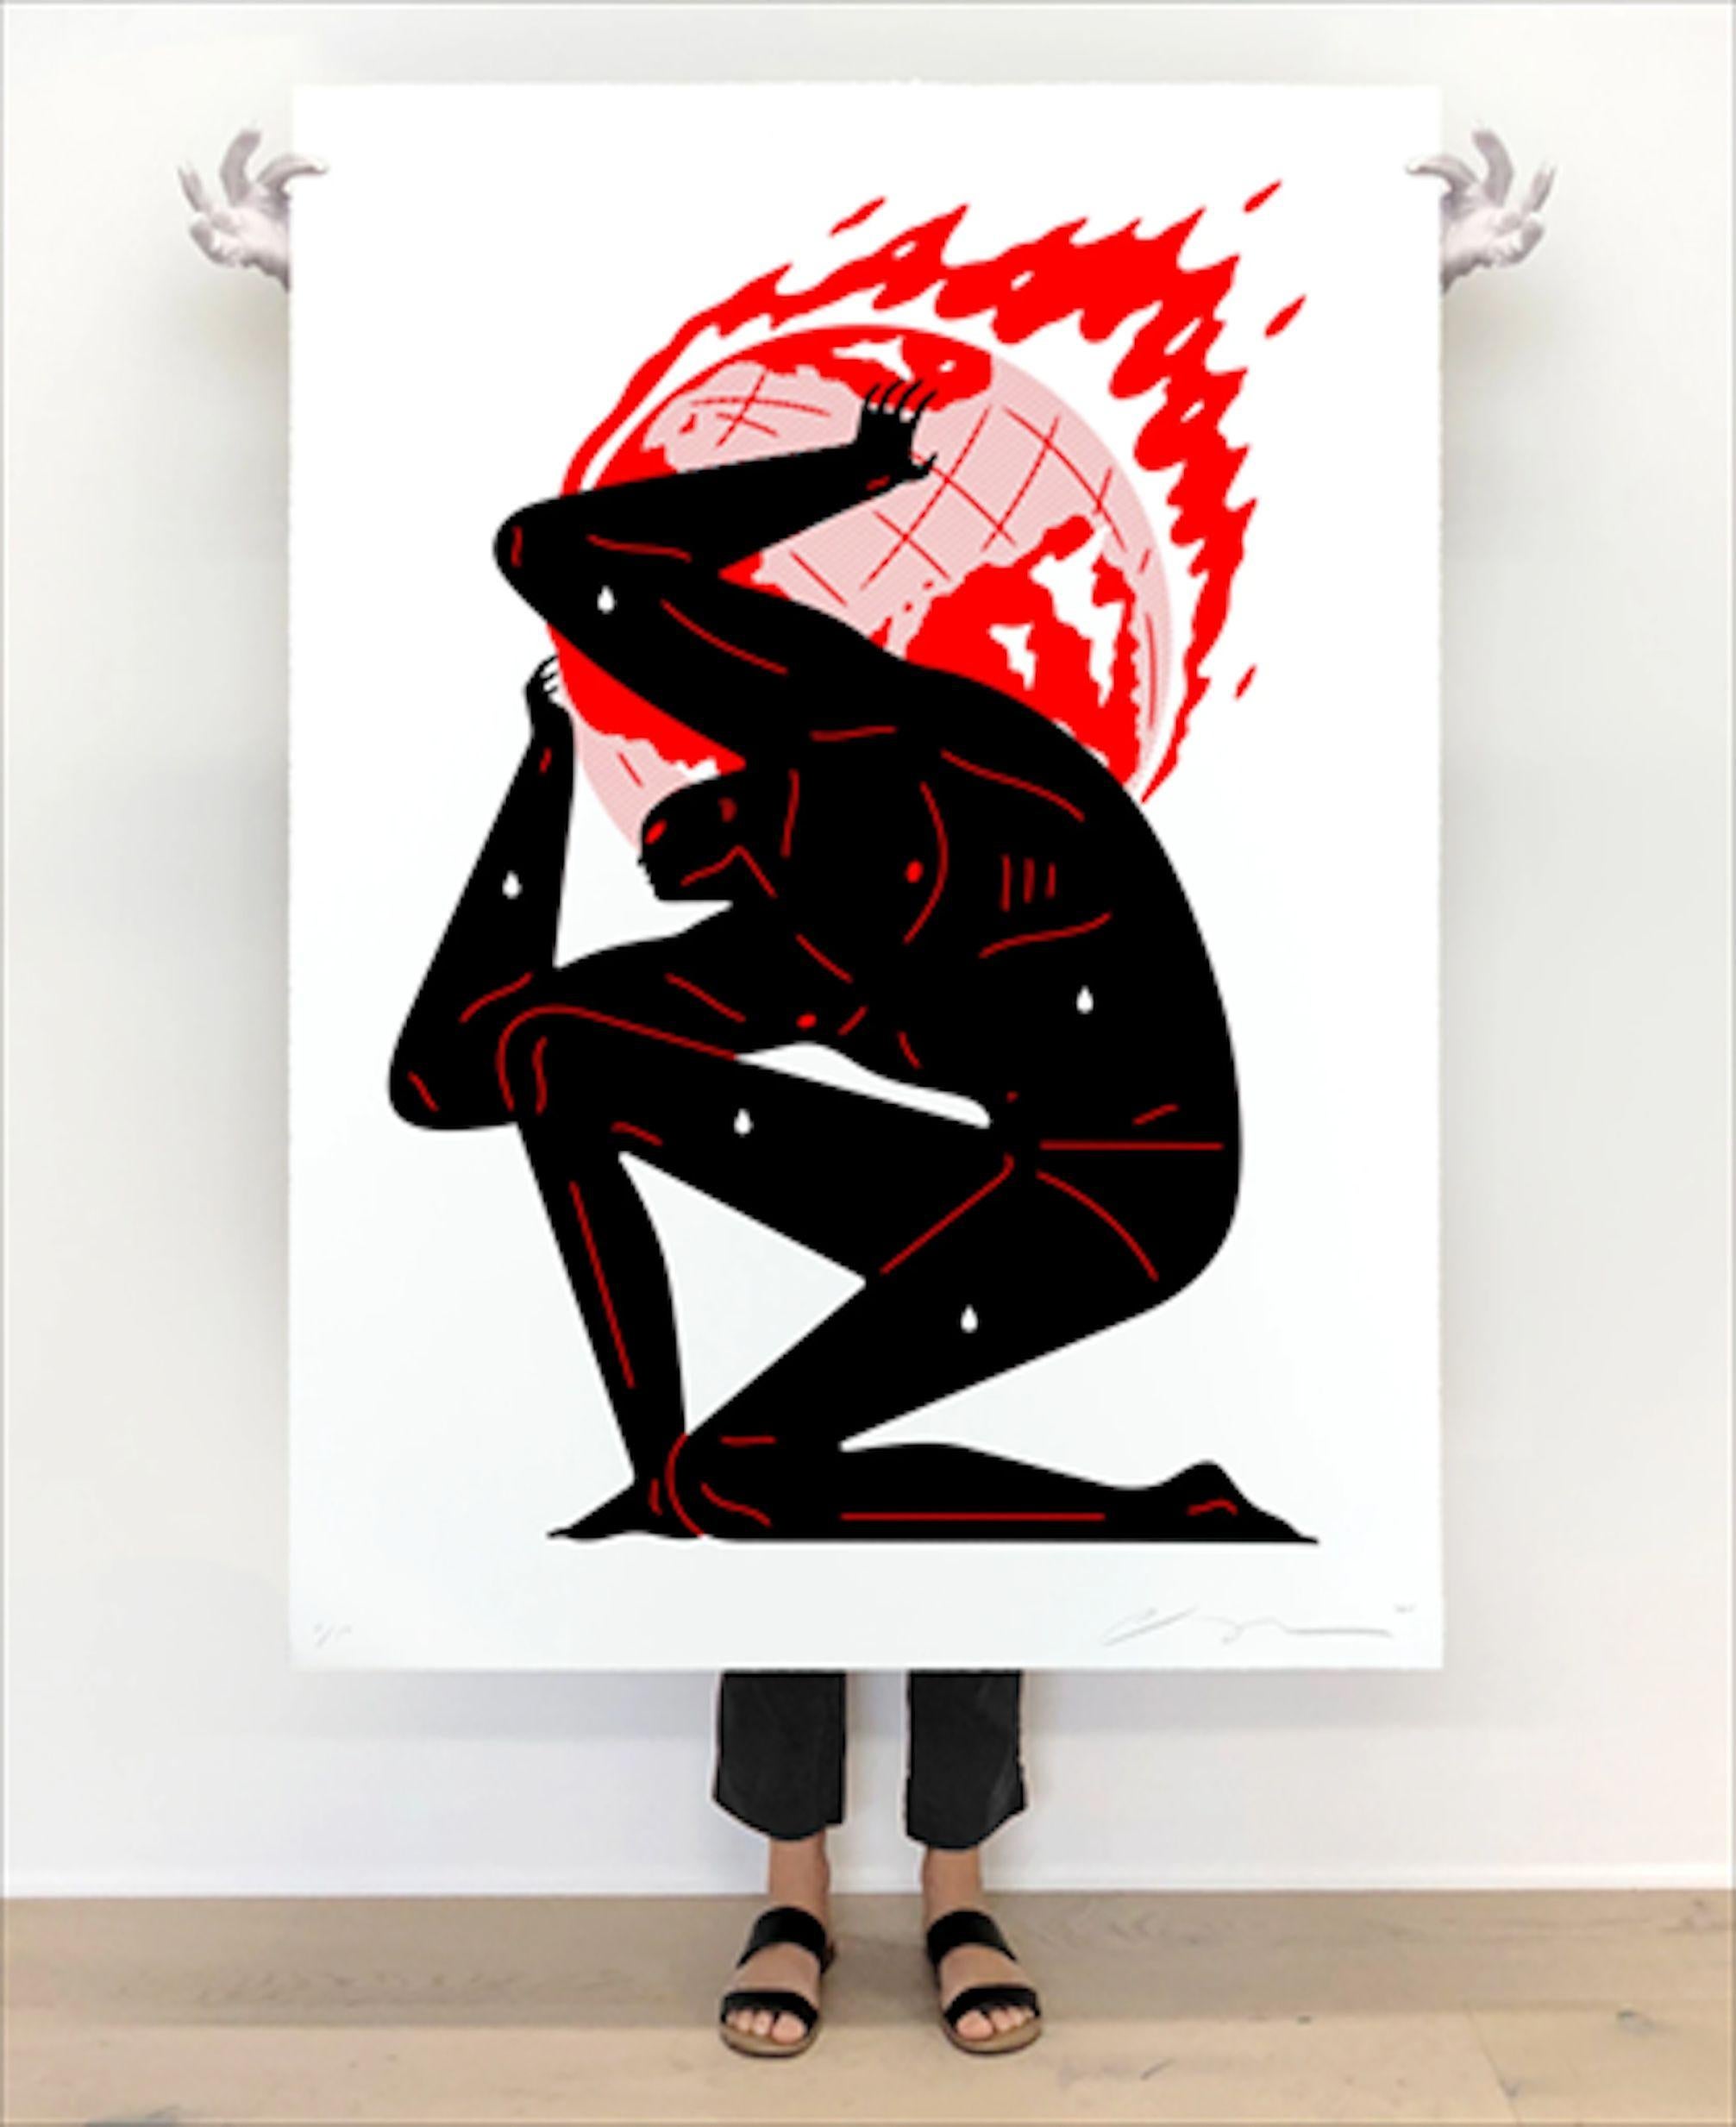 Cleon Peterson Figurative Print - World on Fire (White - Large)